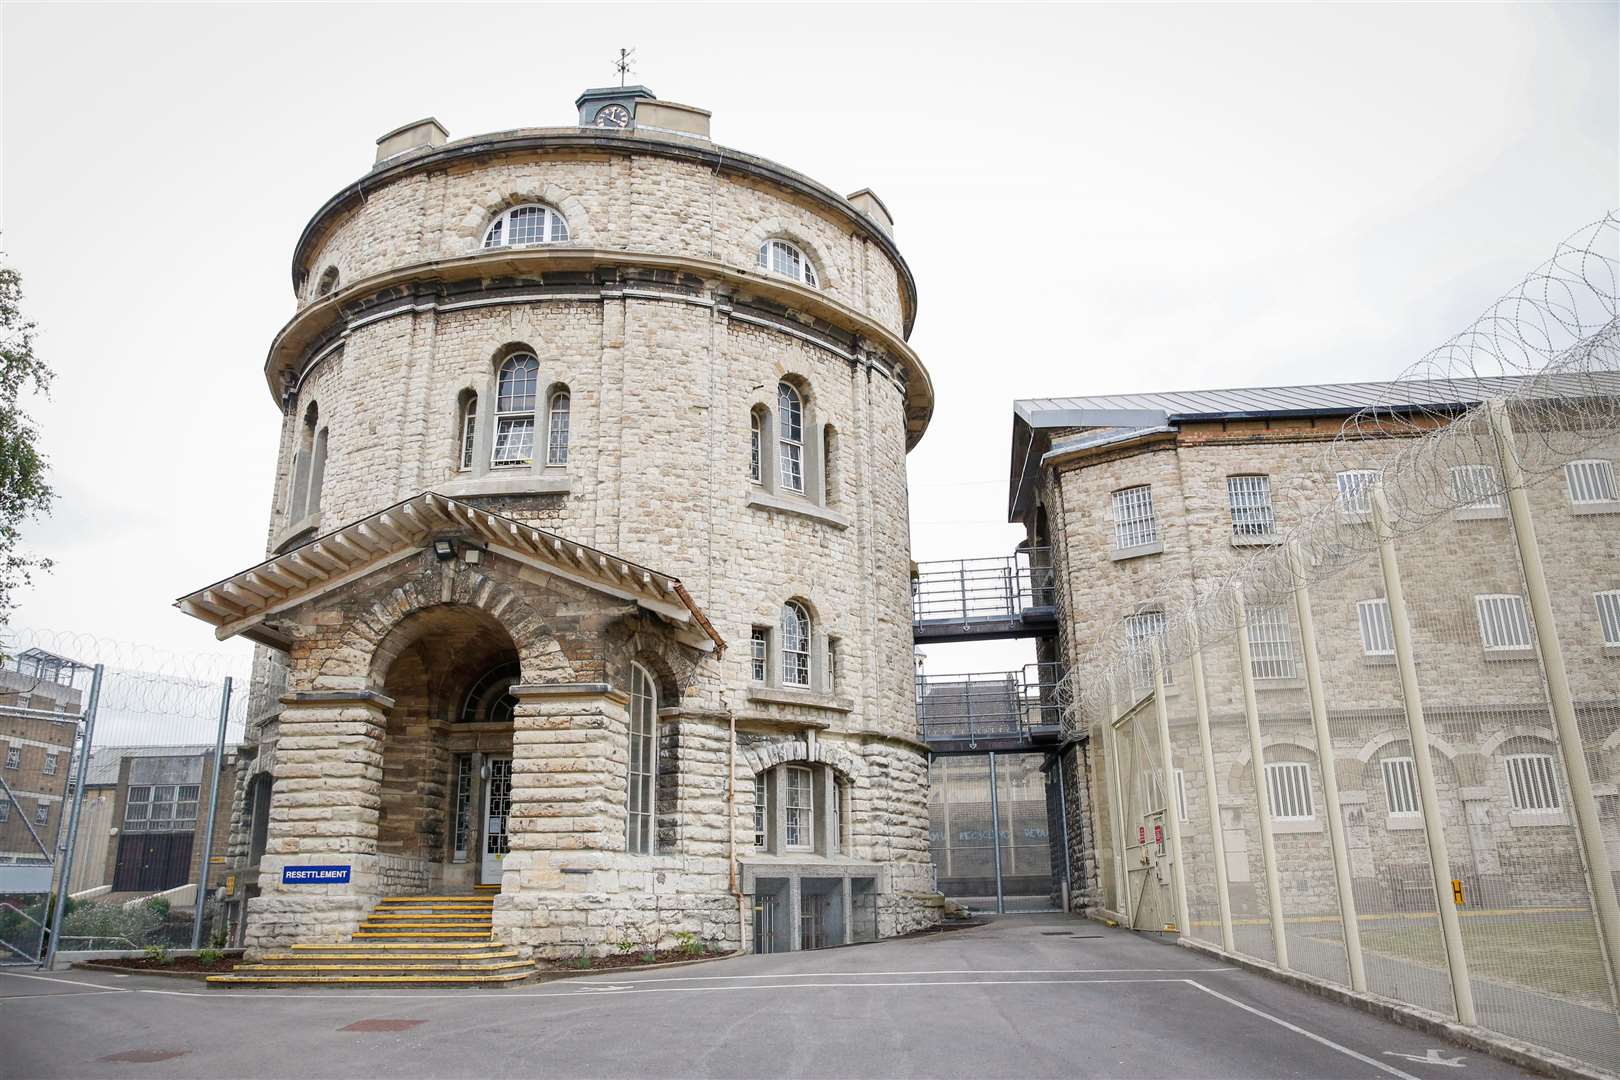 An inquiry has been carried out into the effects of Covid lockdown on prisoners